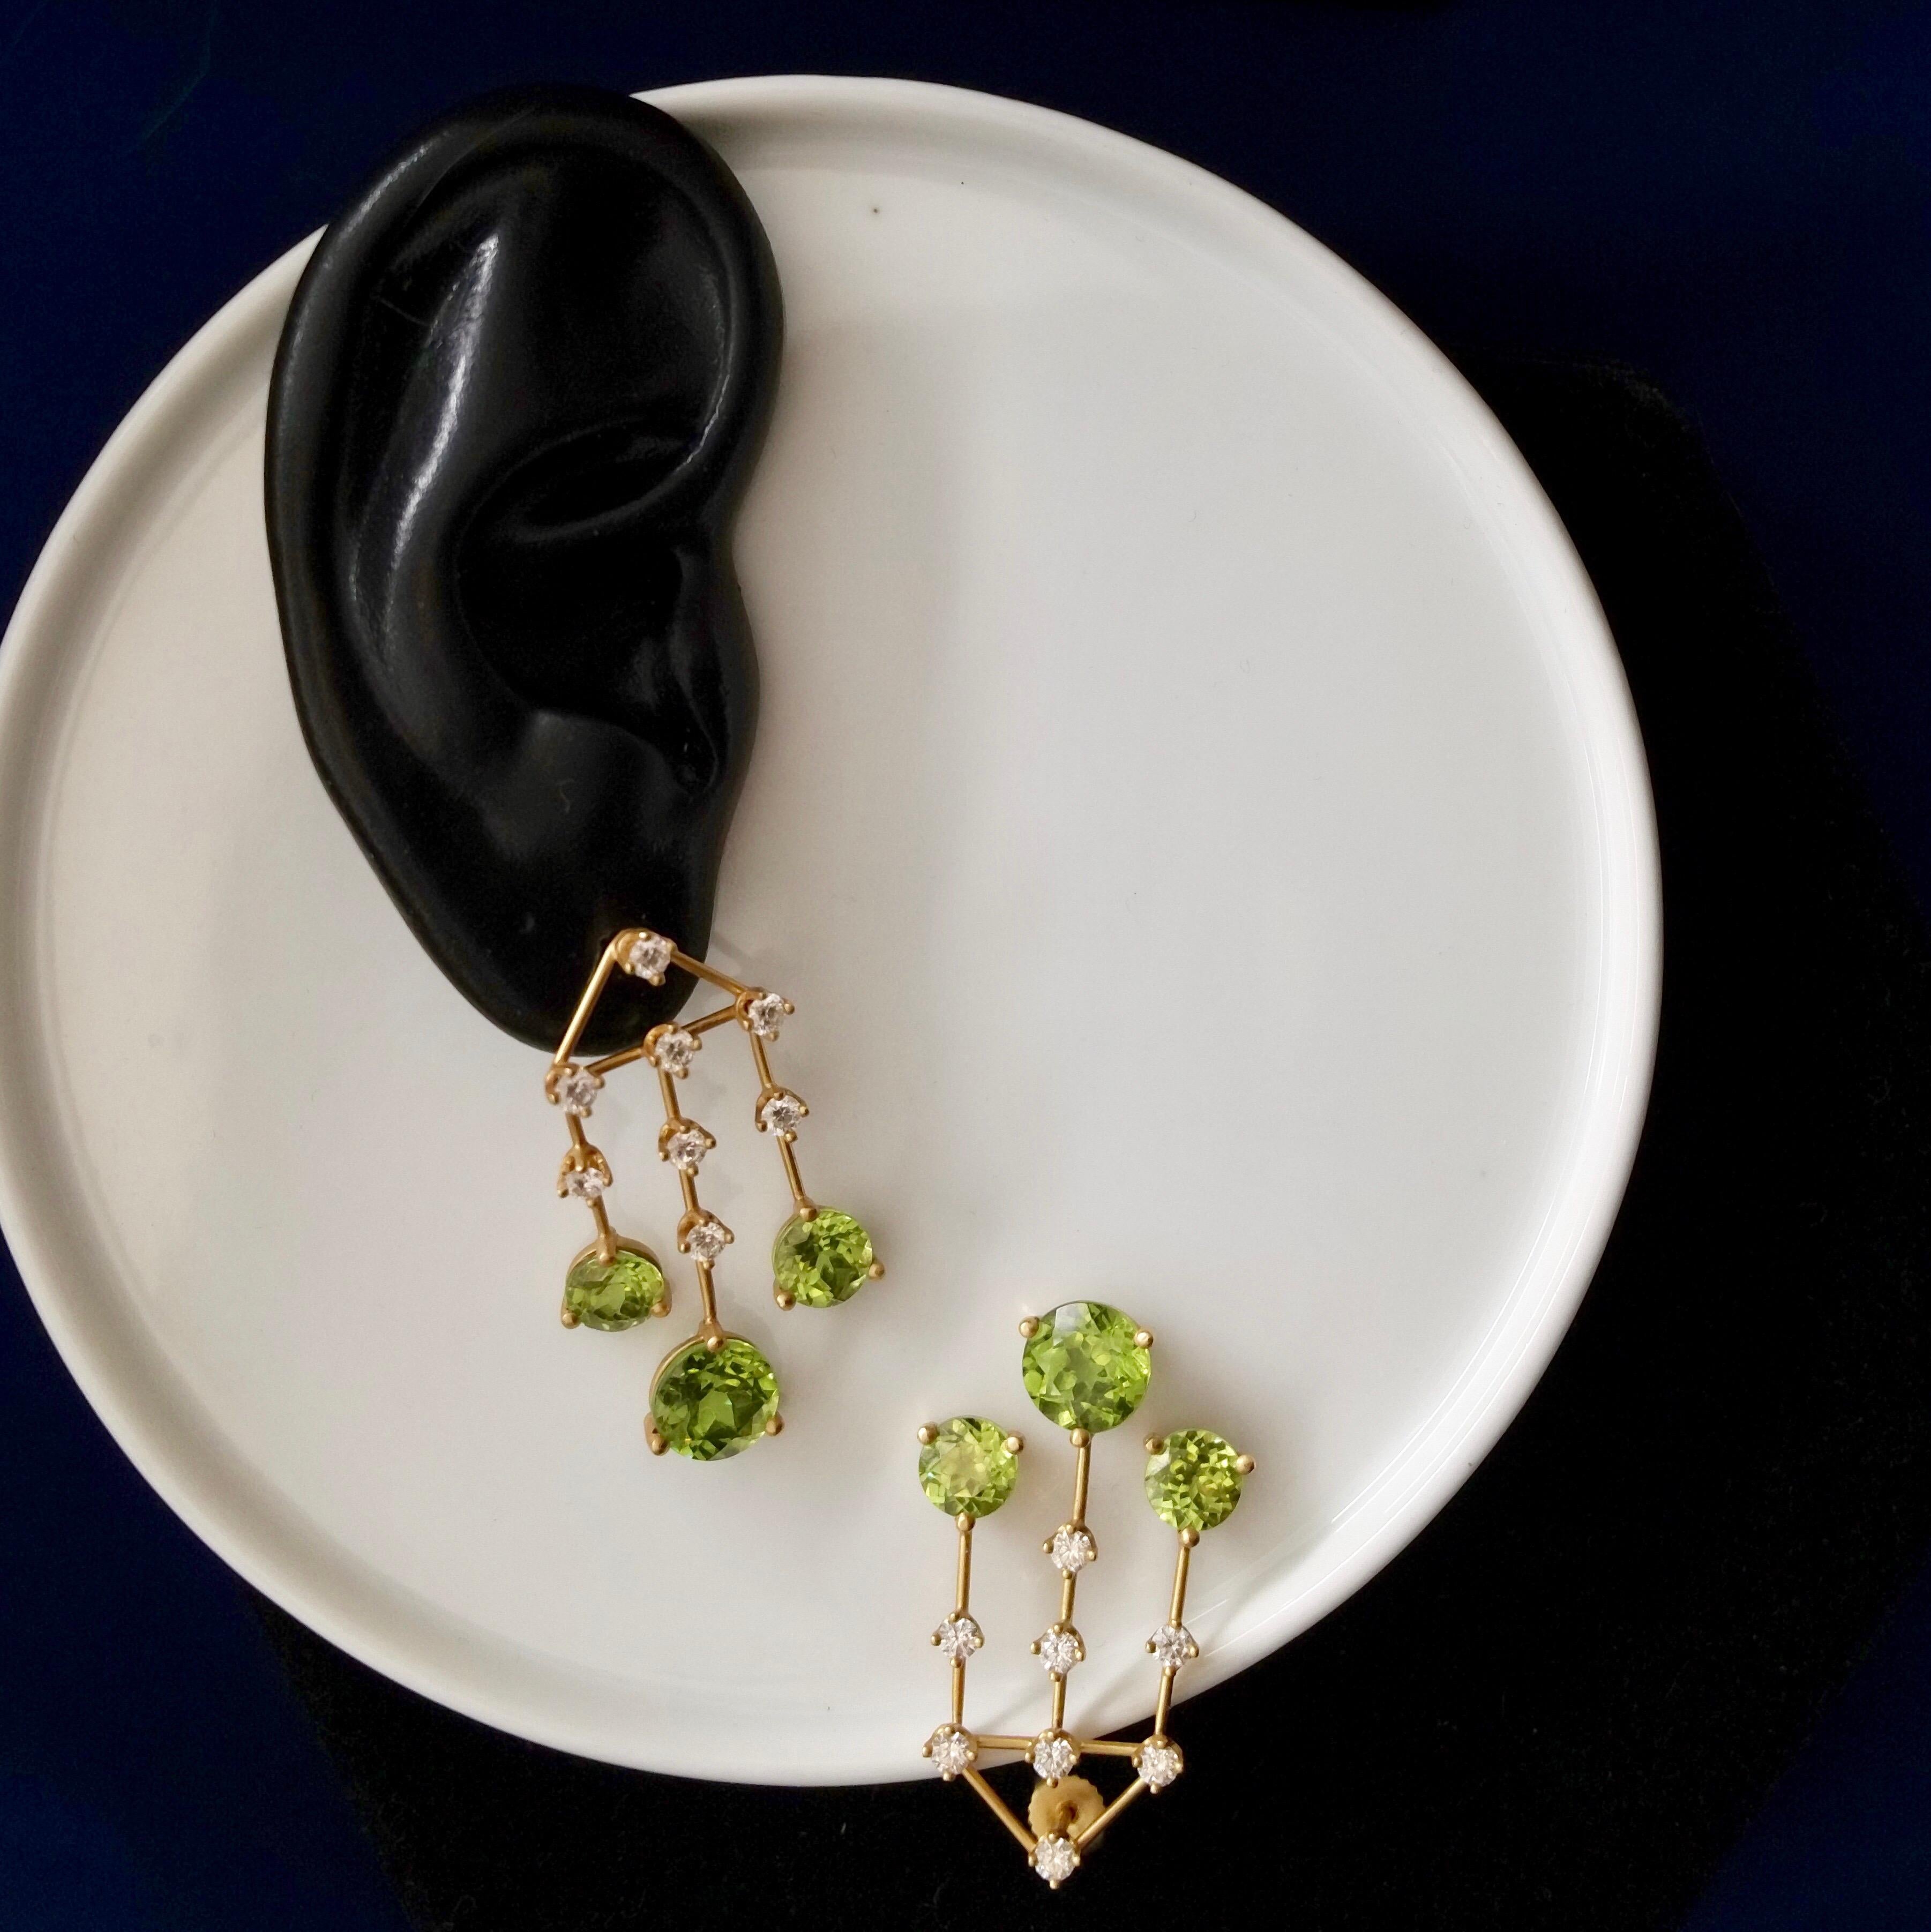 Women's Wendy Brandes Birthstone Chandelier Earrings With Peridot and 1.41 TCW Diamonds For Sale